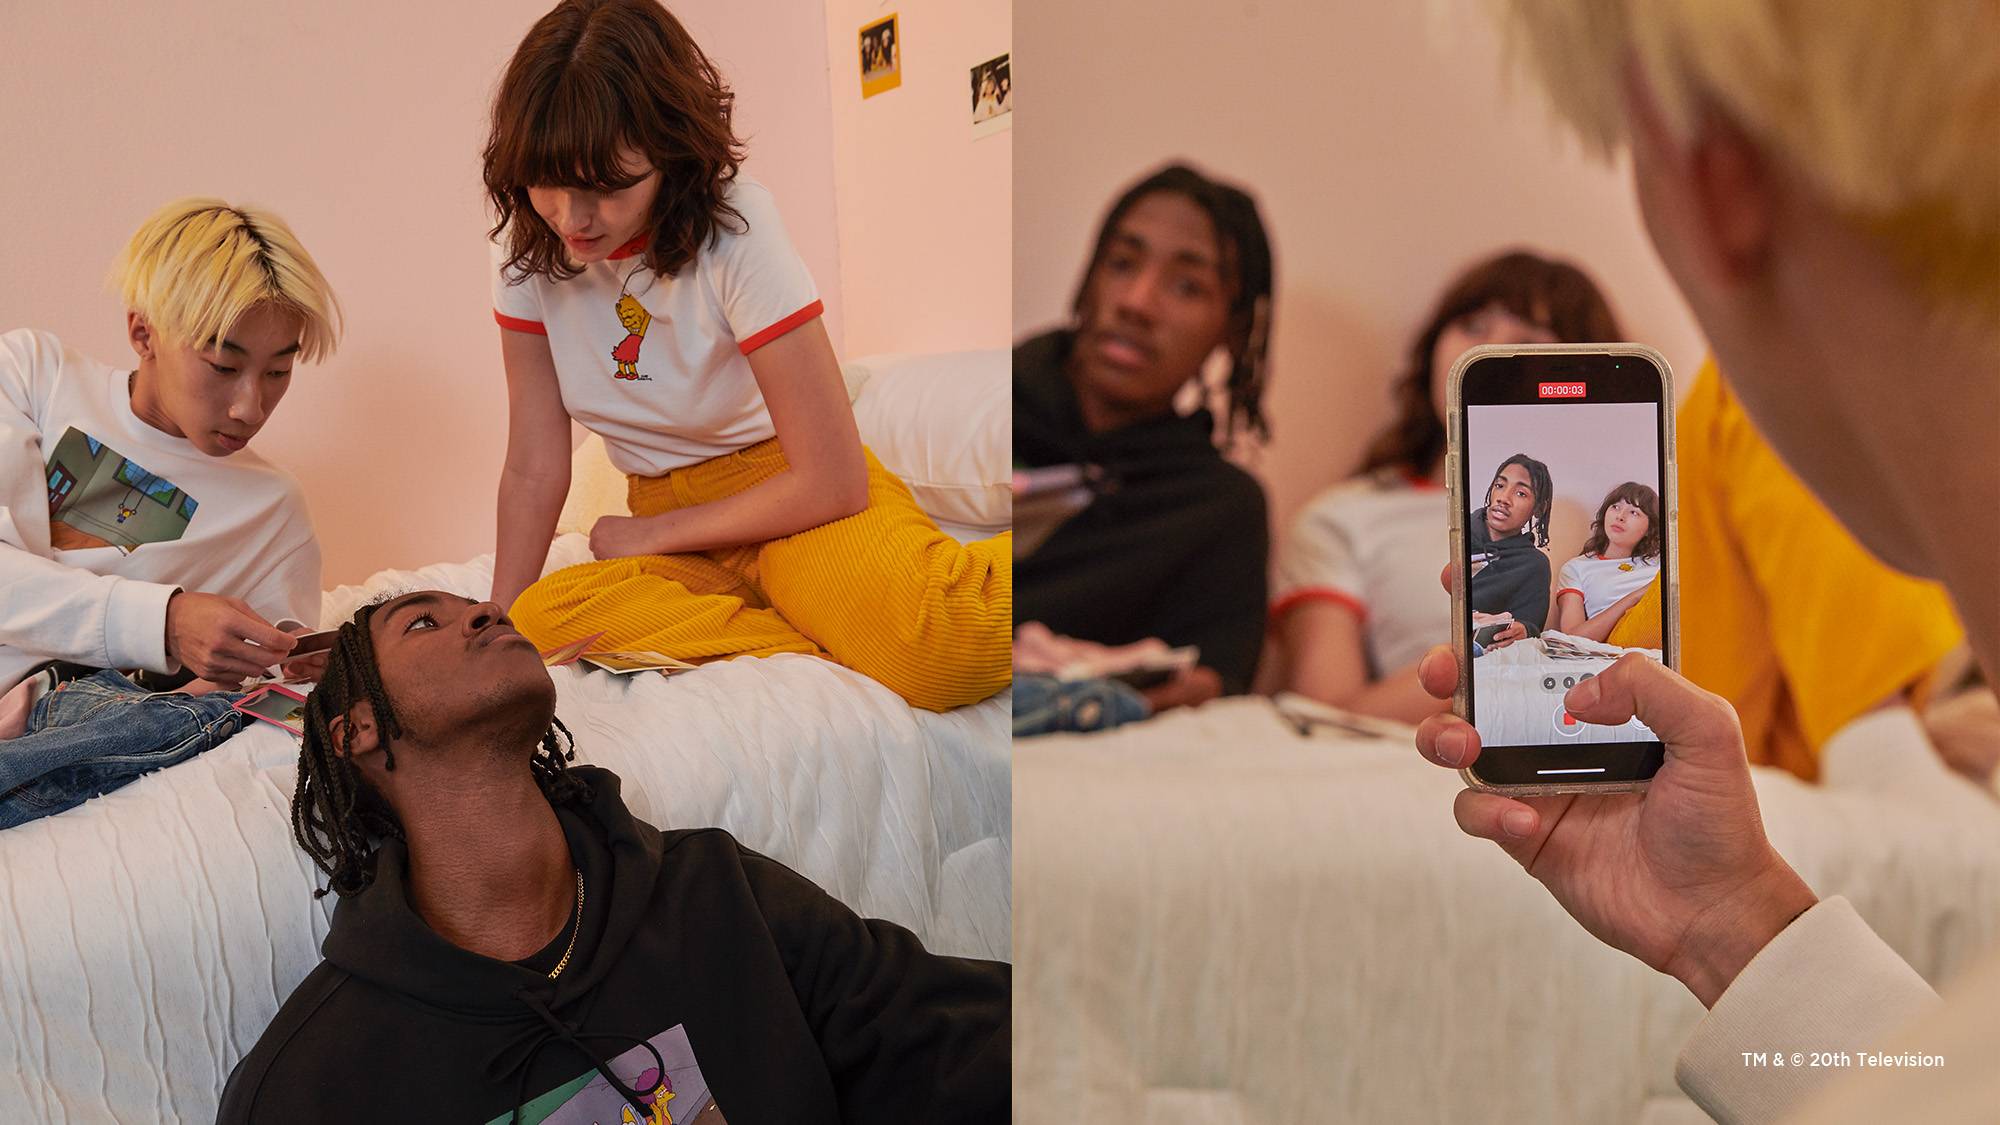 Image of friends hanging out in room wearing clothes slide 1